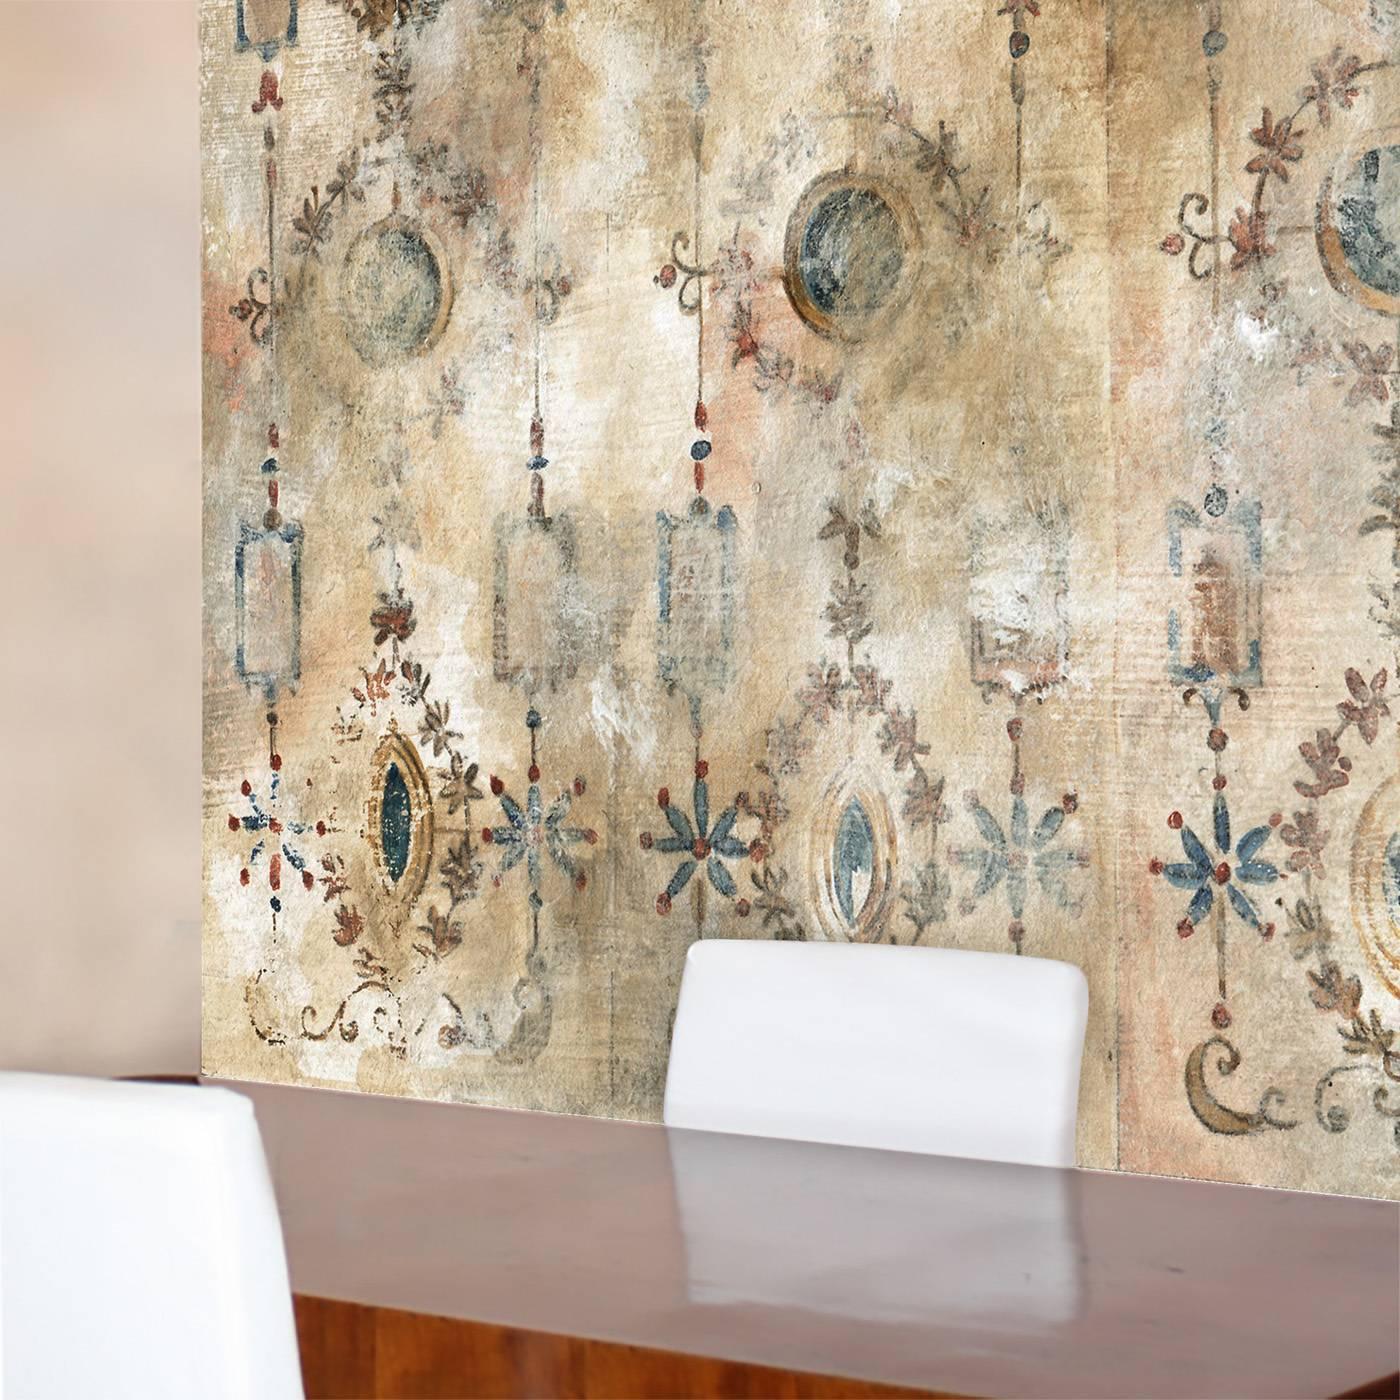 Inspired by the timeless and eclectic wall decorations found in the ancient Roman city of Pompeii, this exquisite wallpaper was entirely painted by hand on paper and is particularly striking when paired with a contemporary decor. The colors can be